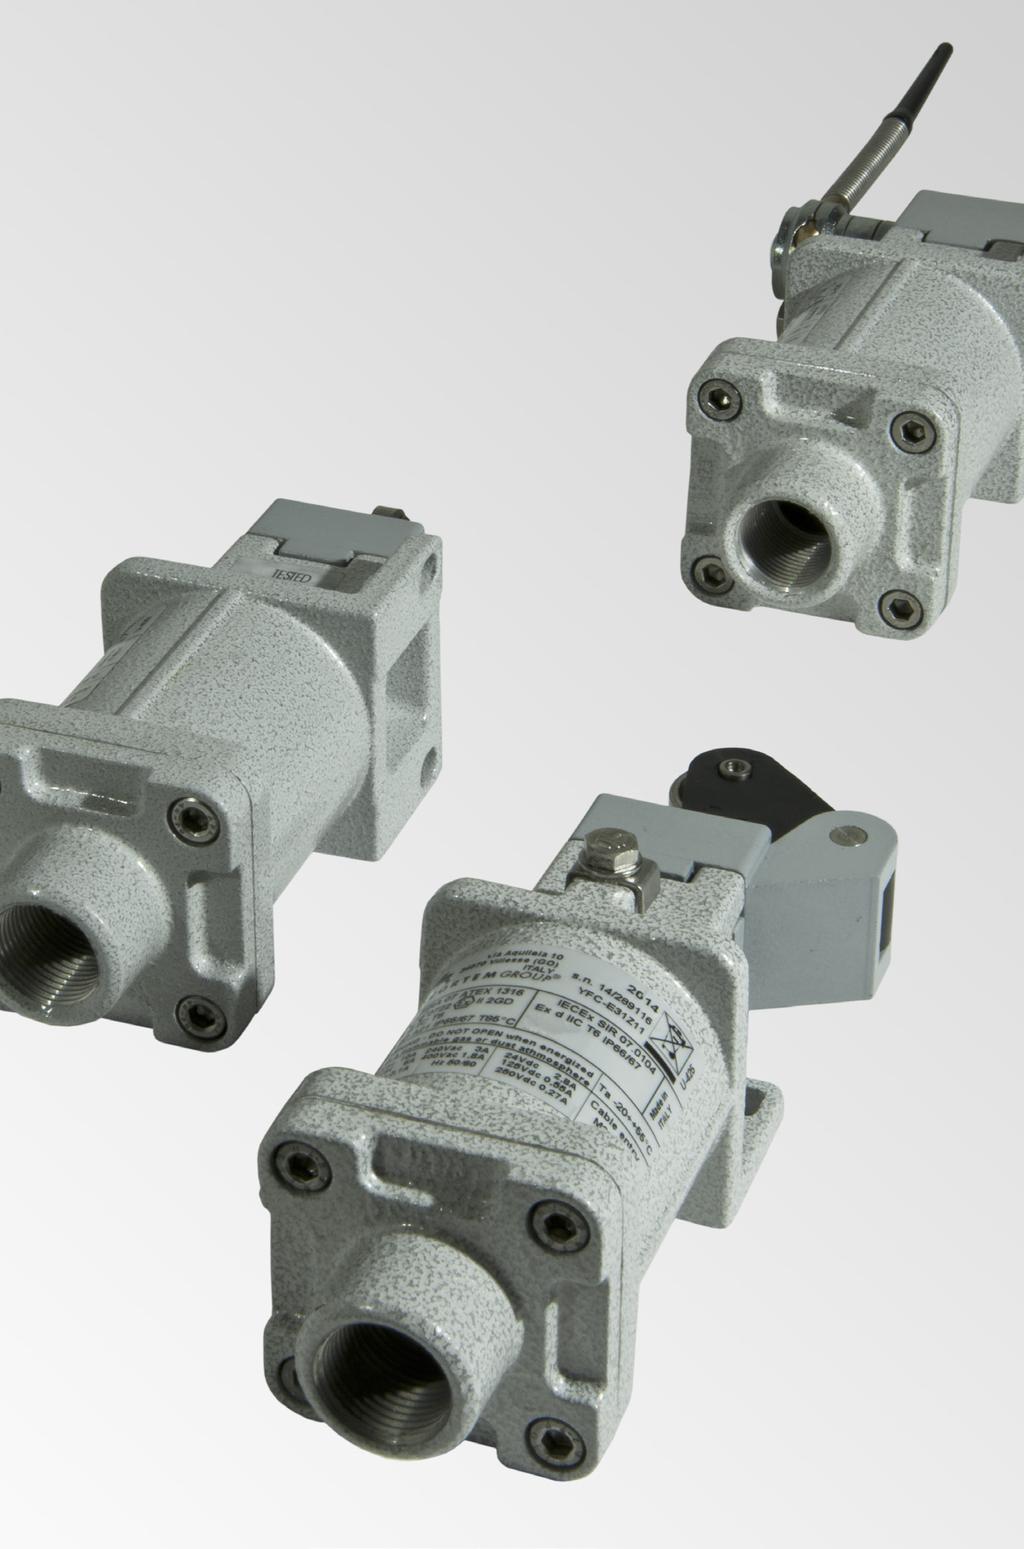 Ex d YFC Limit switch 24 operating head types - Group IIC - Zone 1, 2, 21, 22 - Aluminium alloy - Easy installation, wiring and